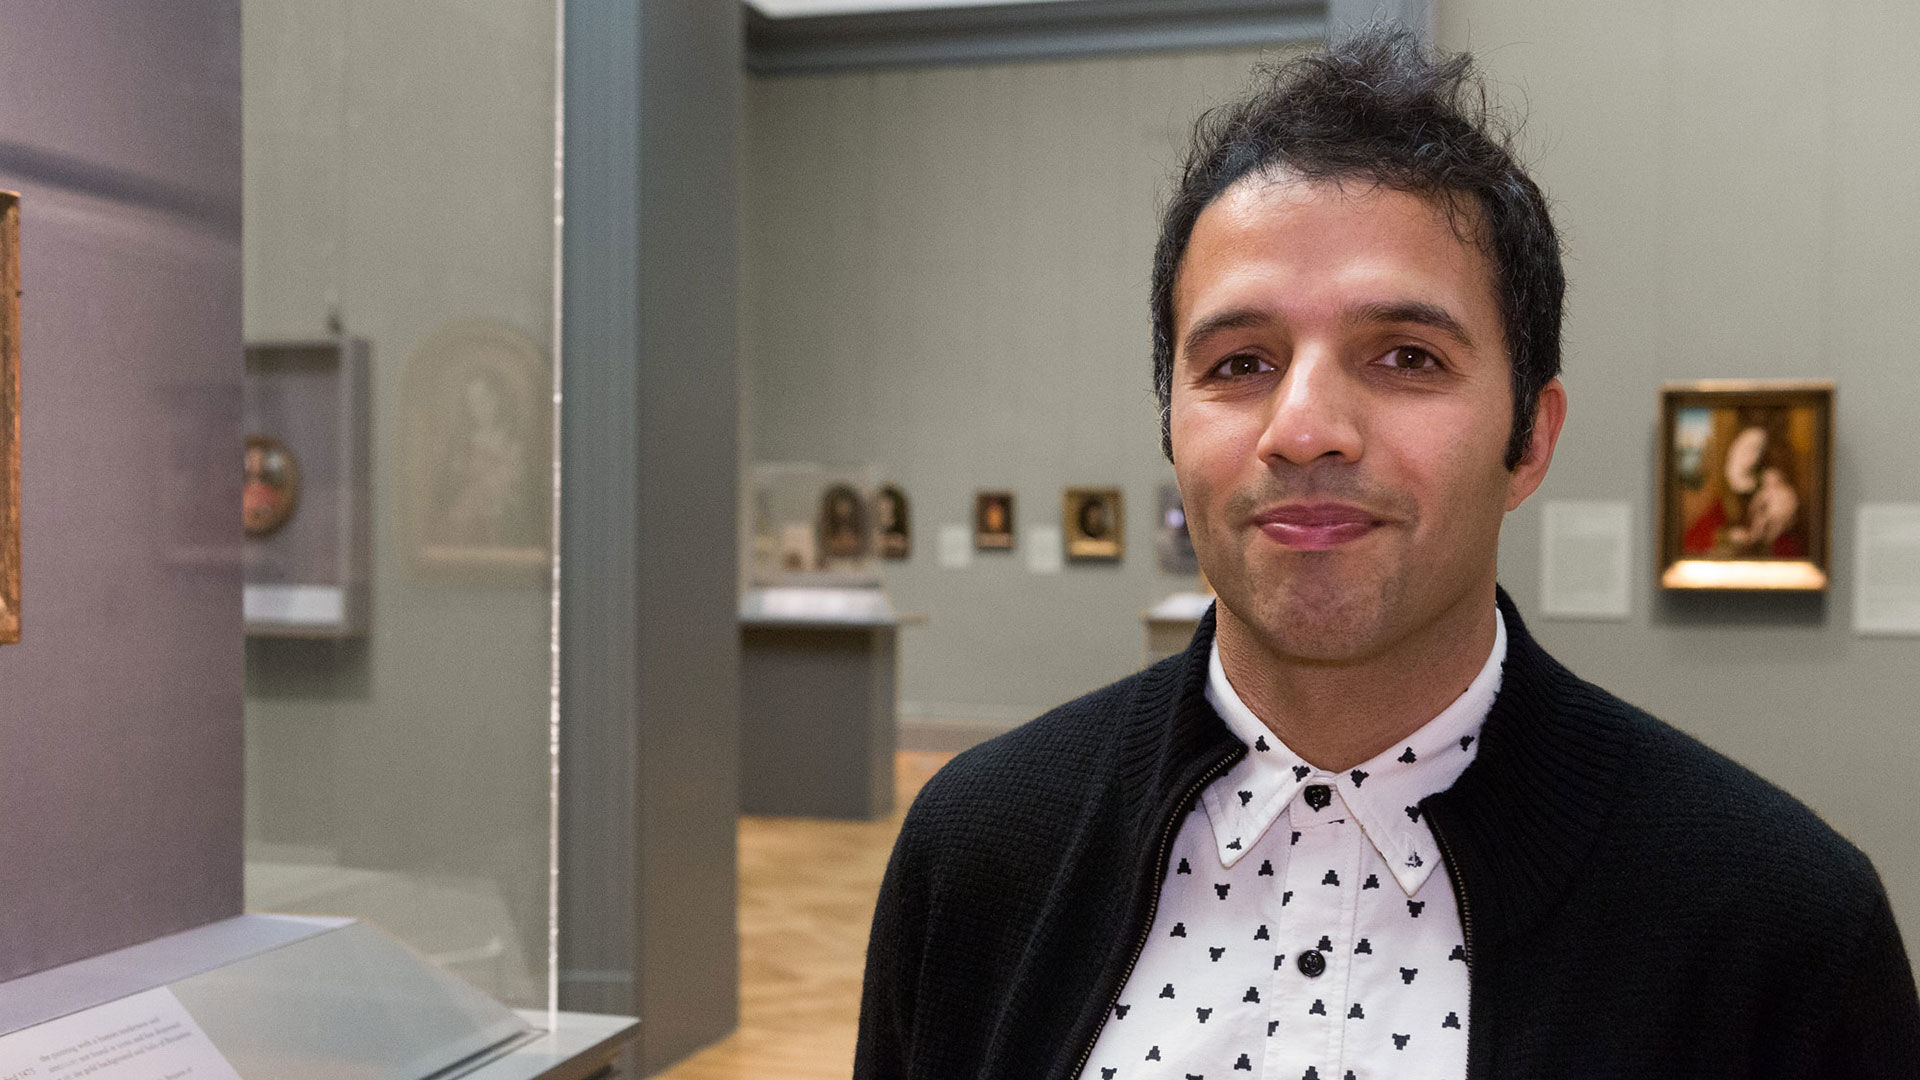 Ali Banisadr on Hieronymus Bosch's The Adoration of the Magi